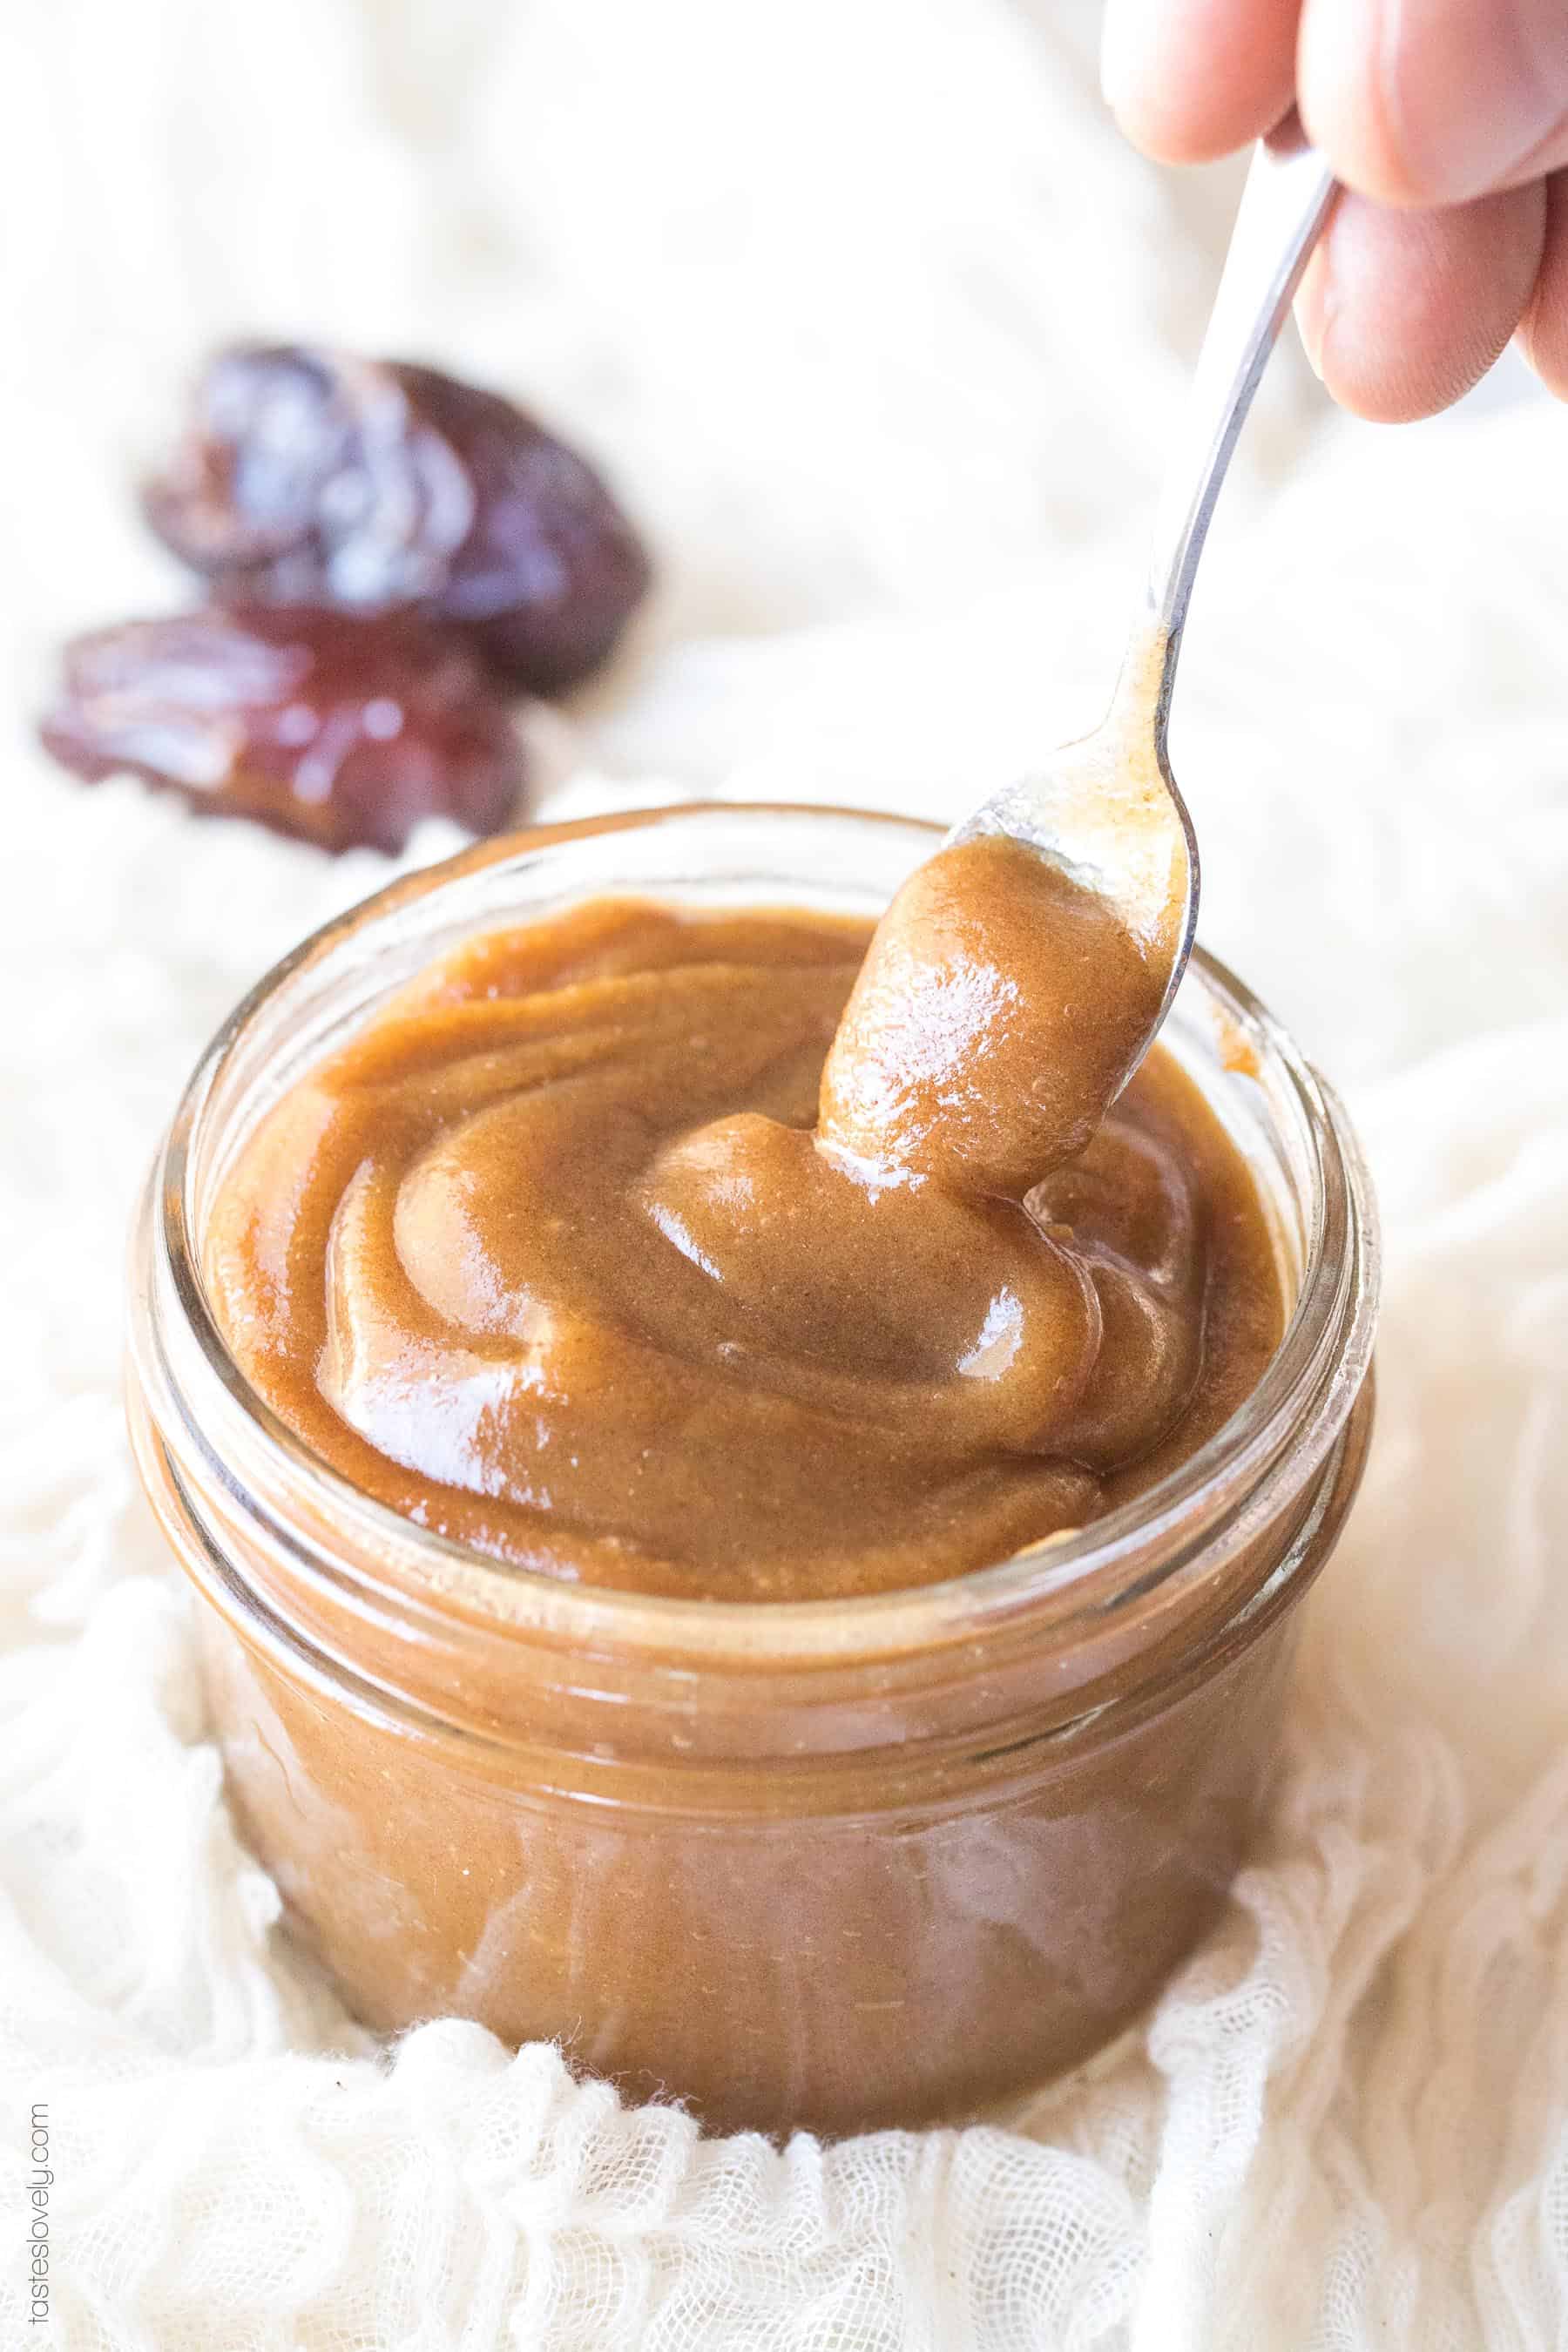 A spoon in a jar of date paste